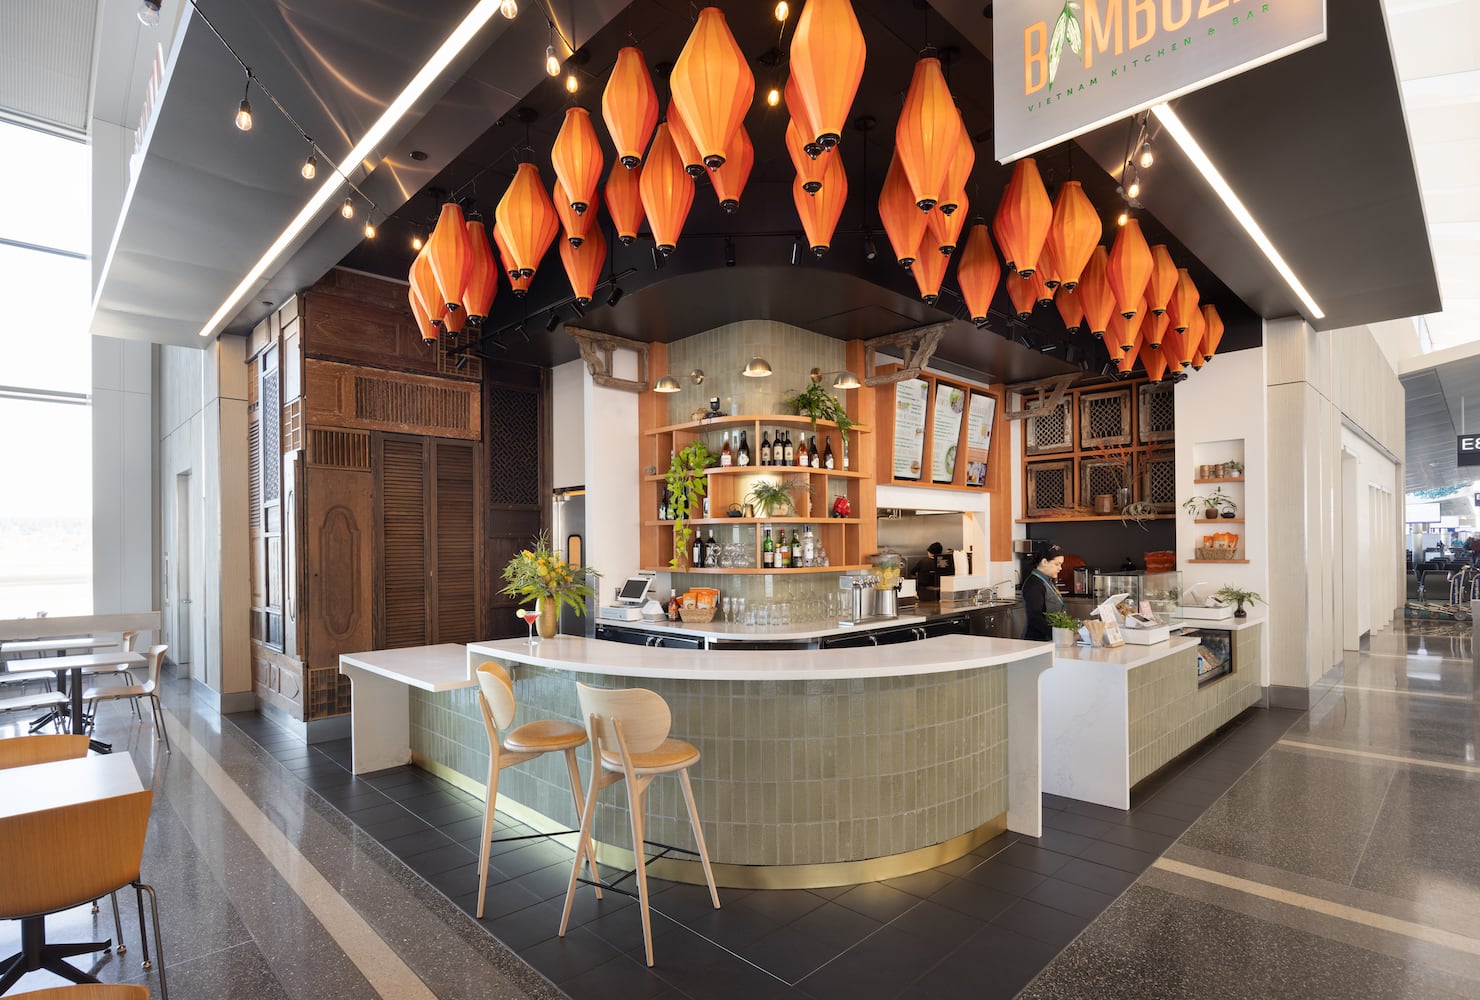 Bambuza PDX, a restaurant (commercial hospitality construction) project in Portland Airport